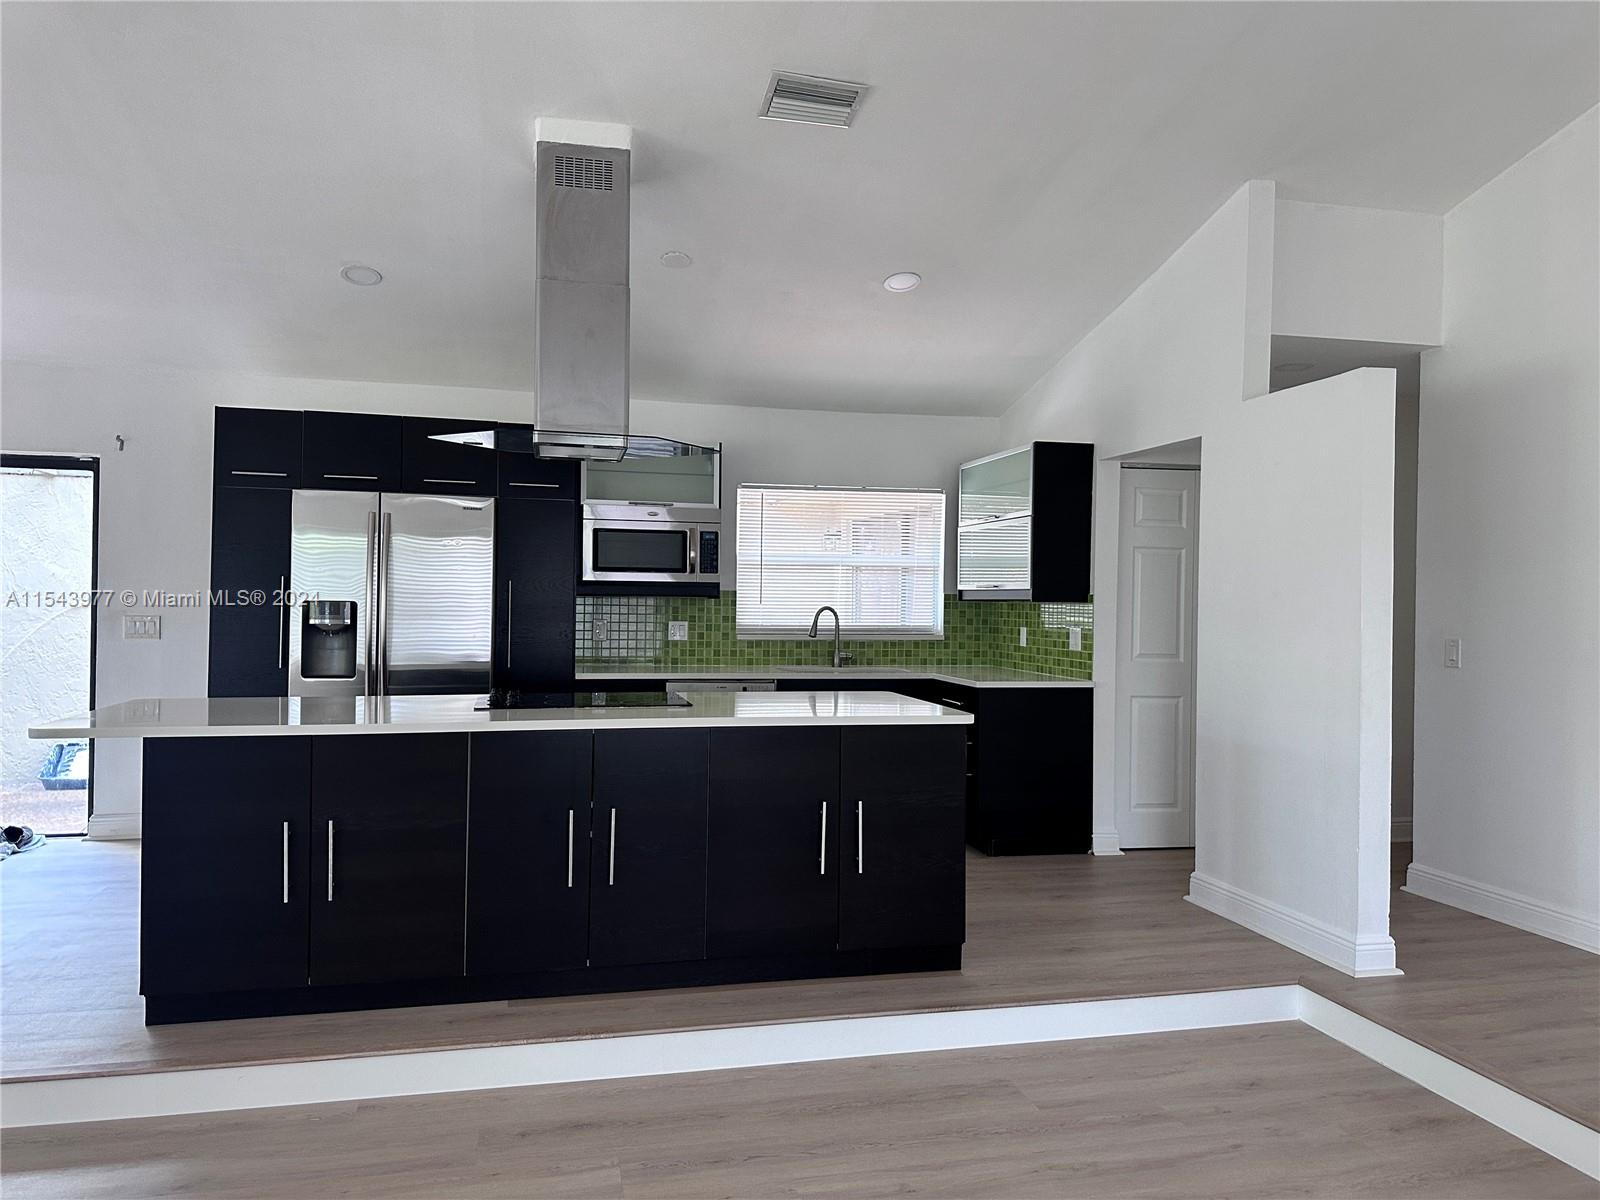 a view of kitchen with stainless steel appliances granite countertop cabinets and wooden floor